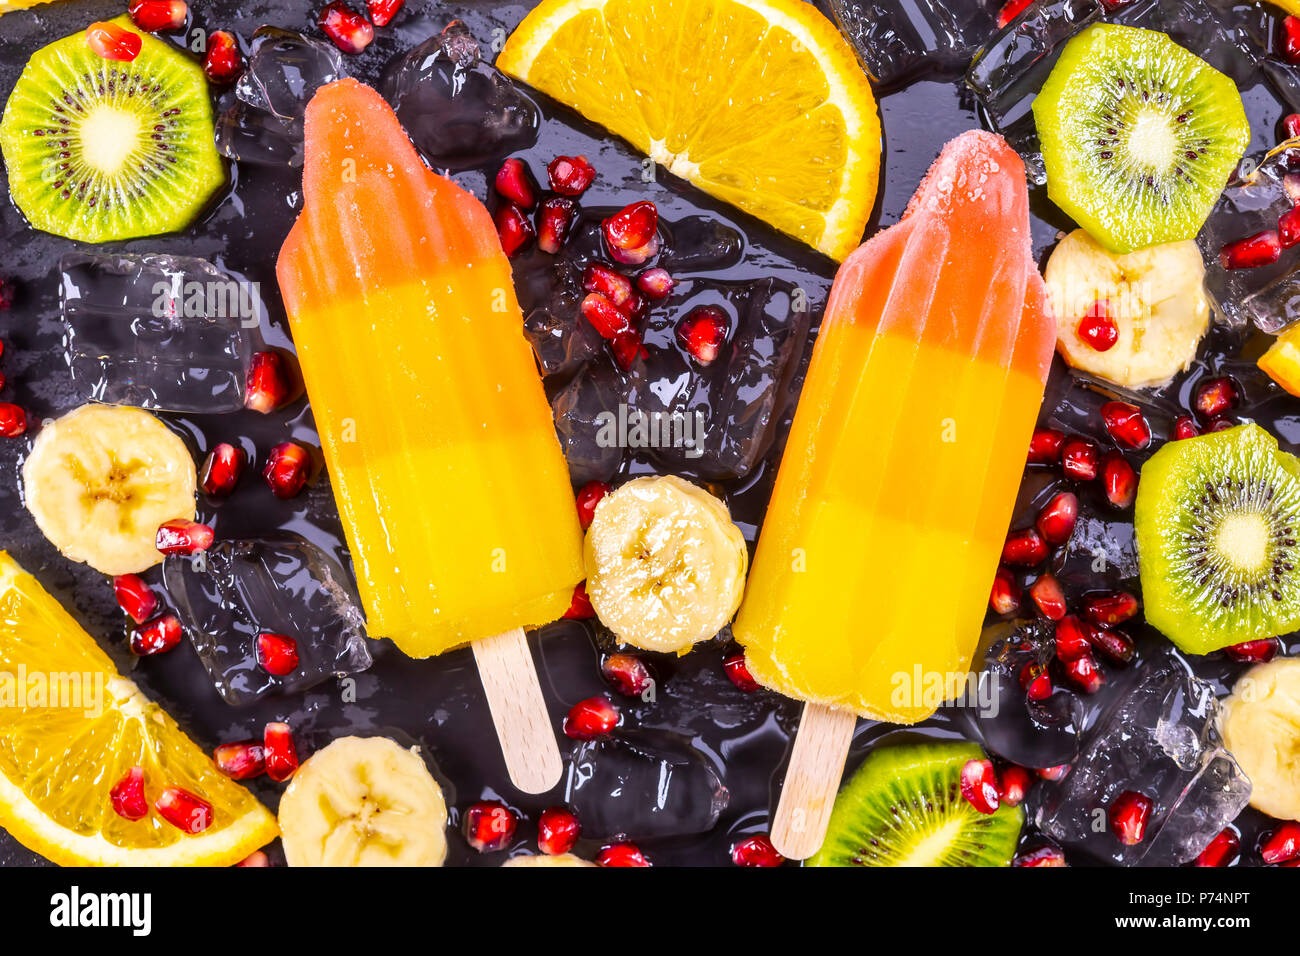 Fruit ice cream on stick with slices fruits on black slate board. Focus on Popsicles. Stock Photo